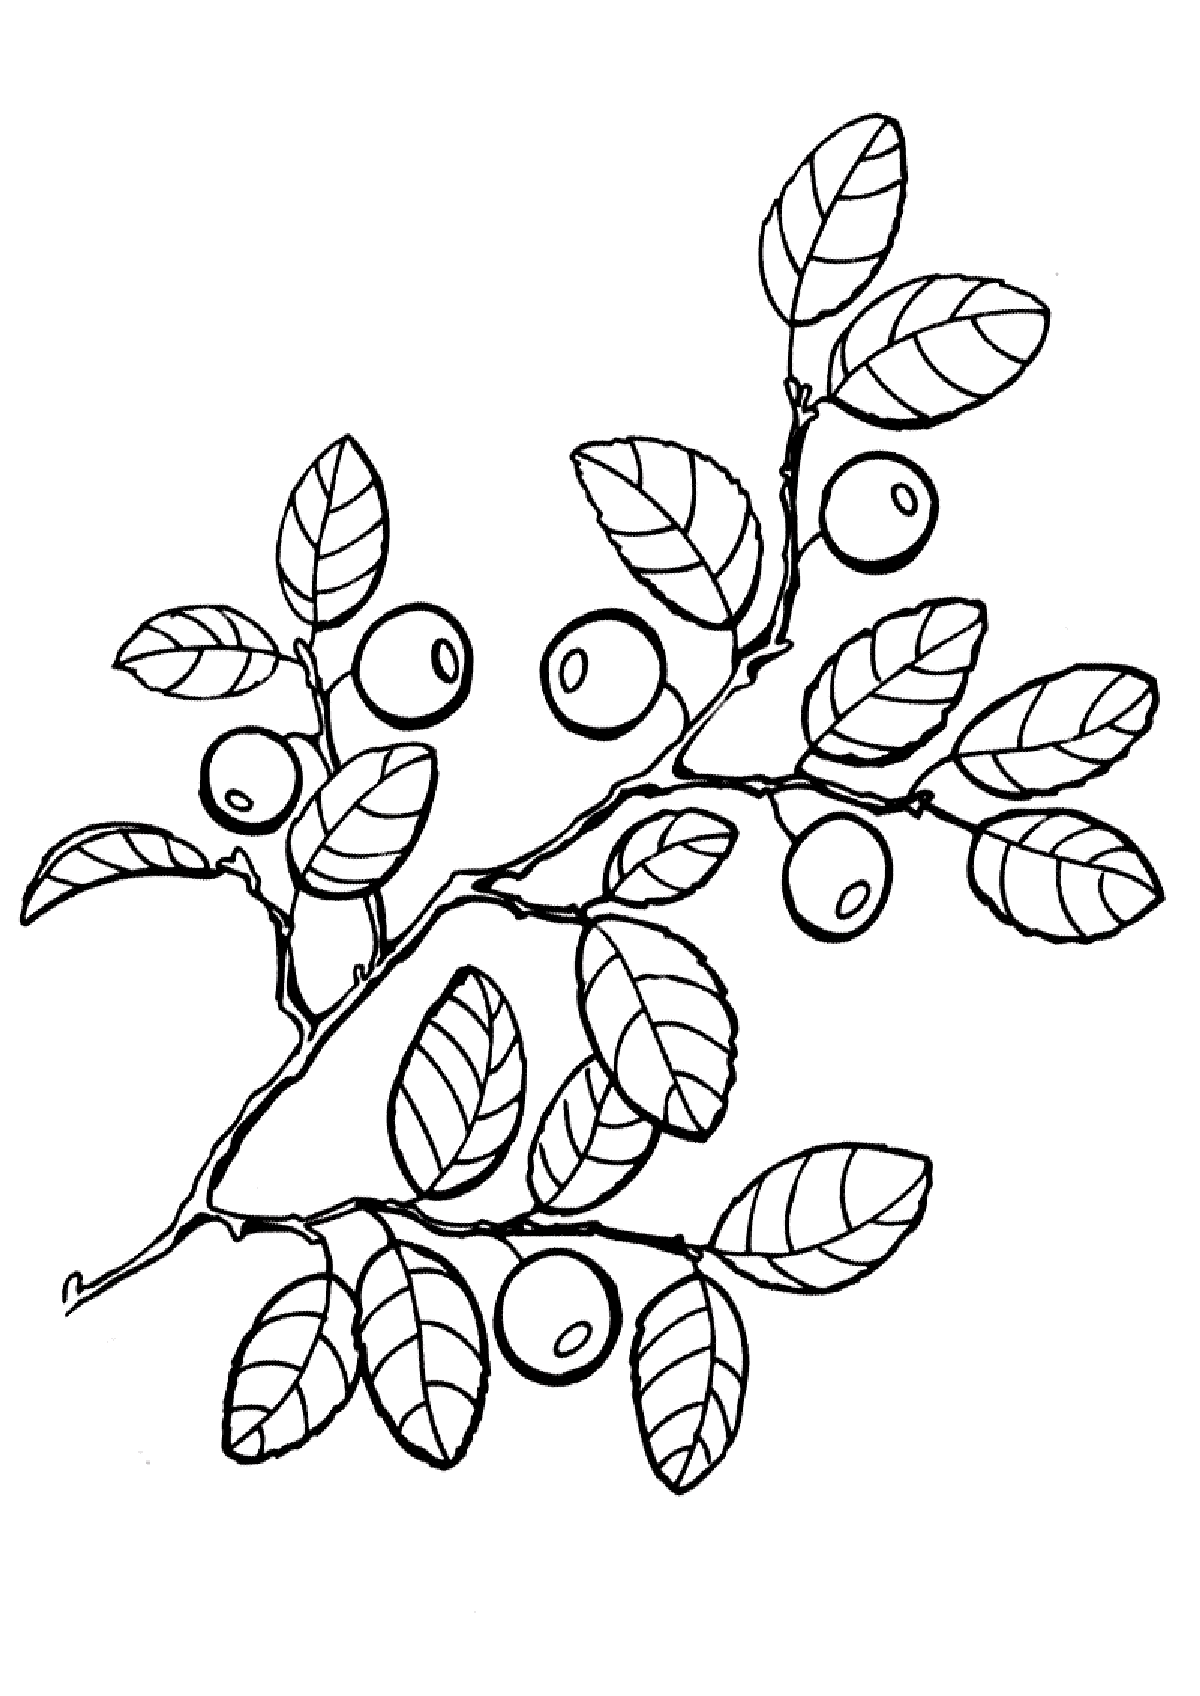 Download Coloring Pages 4